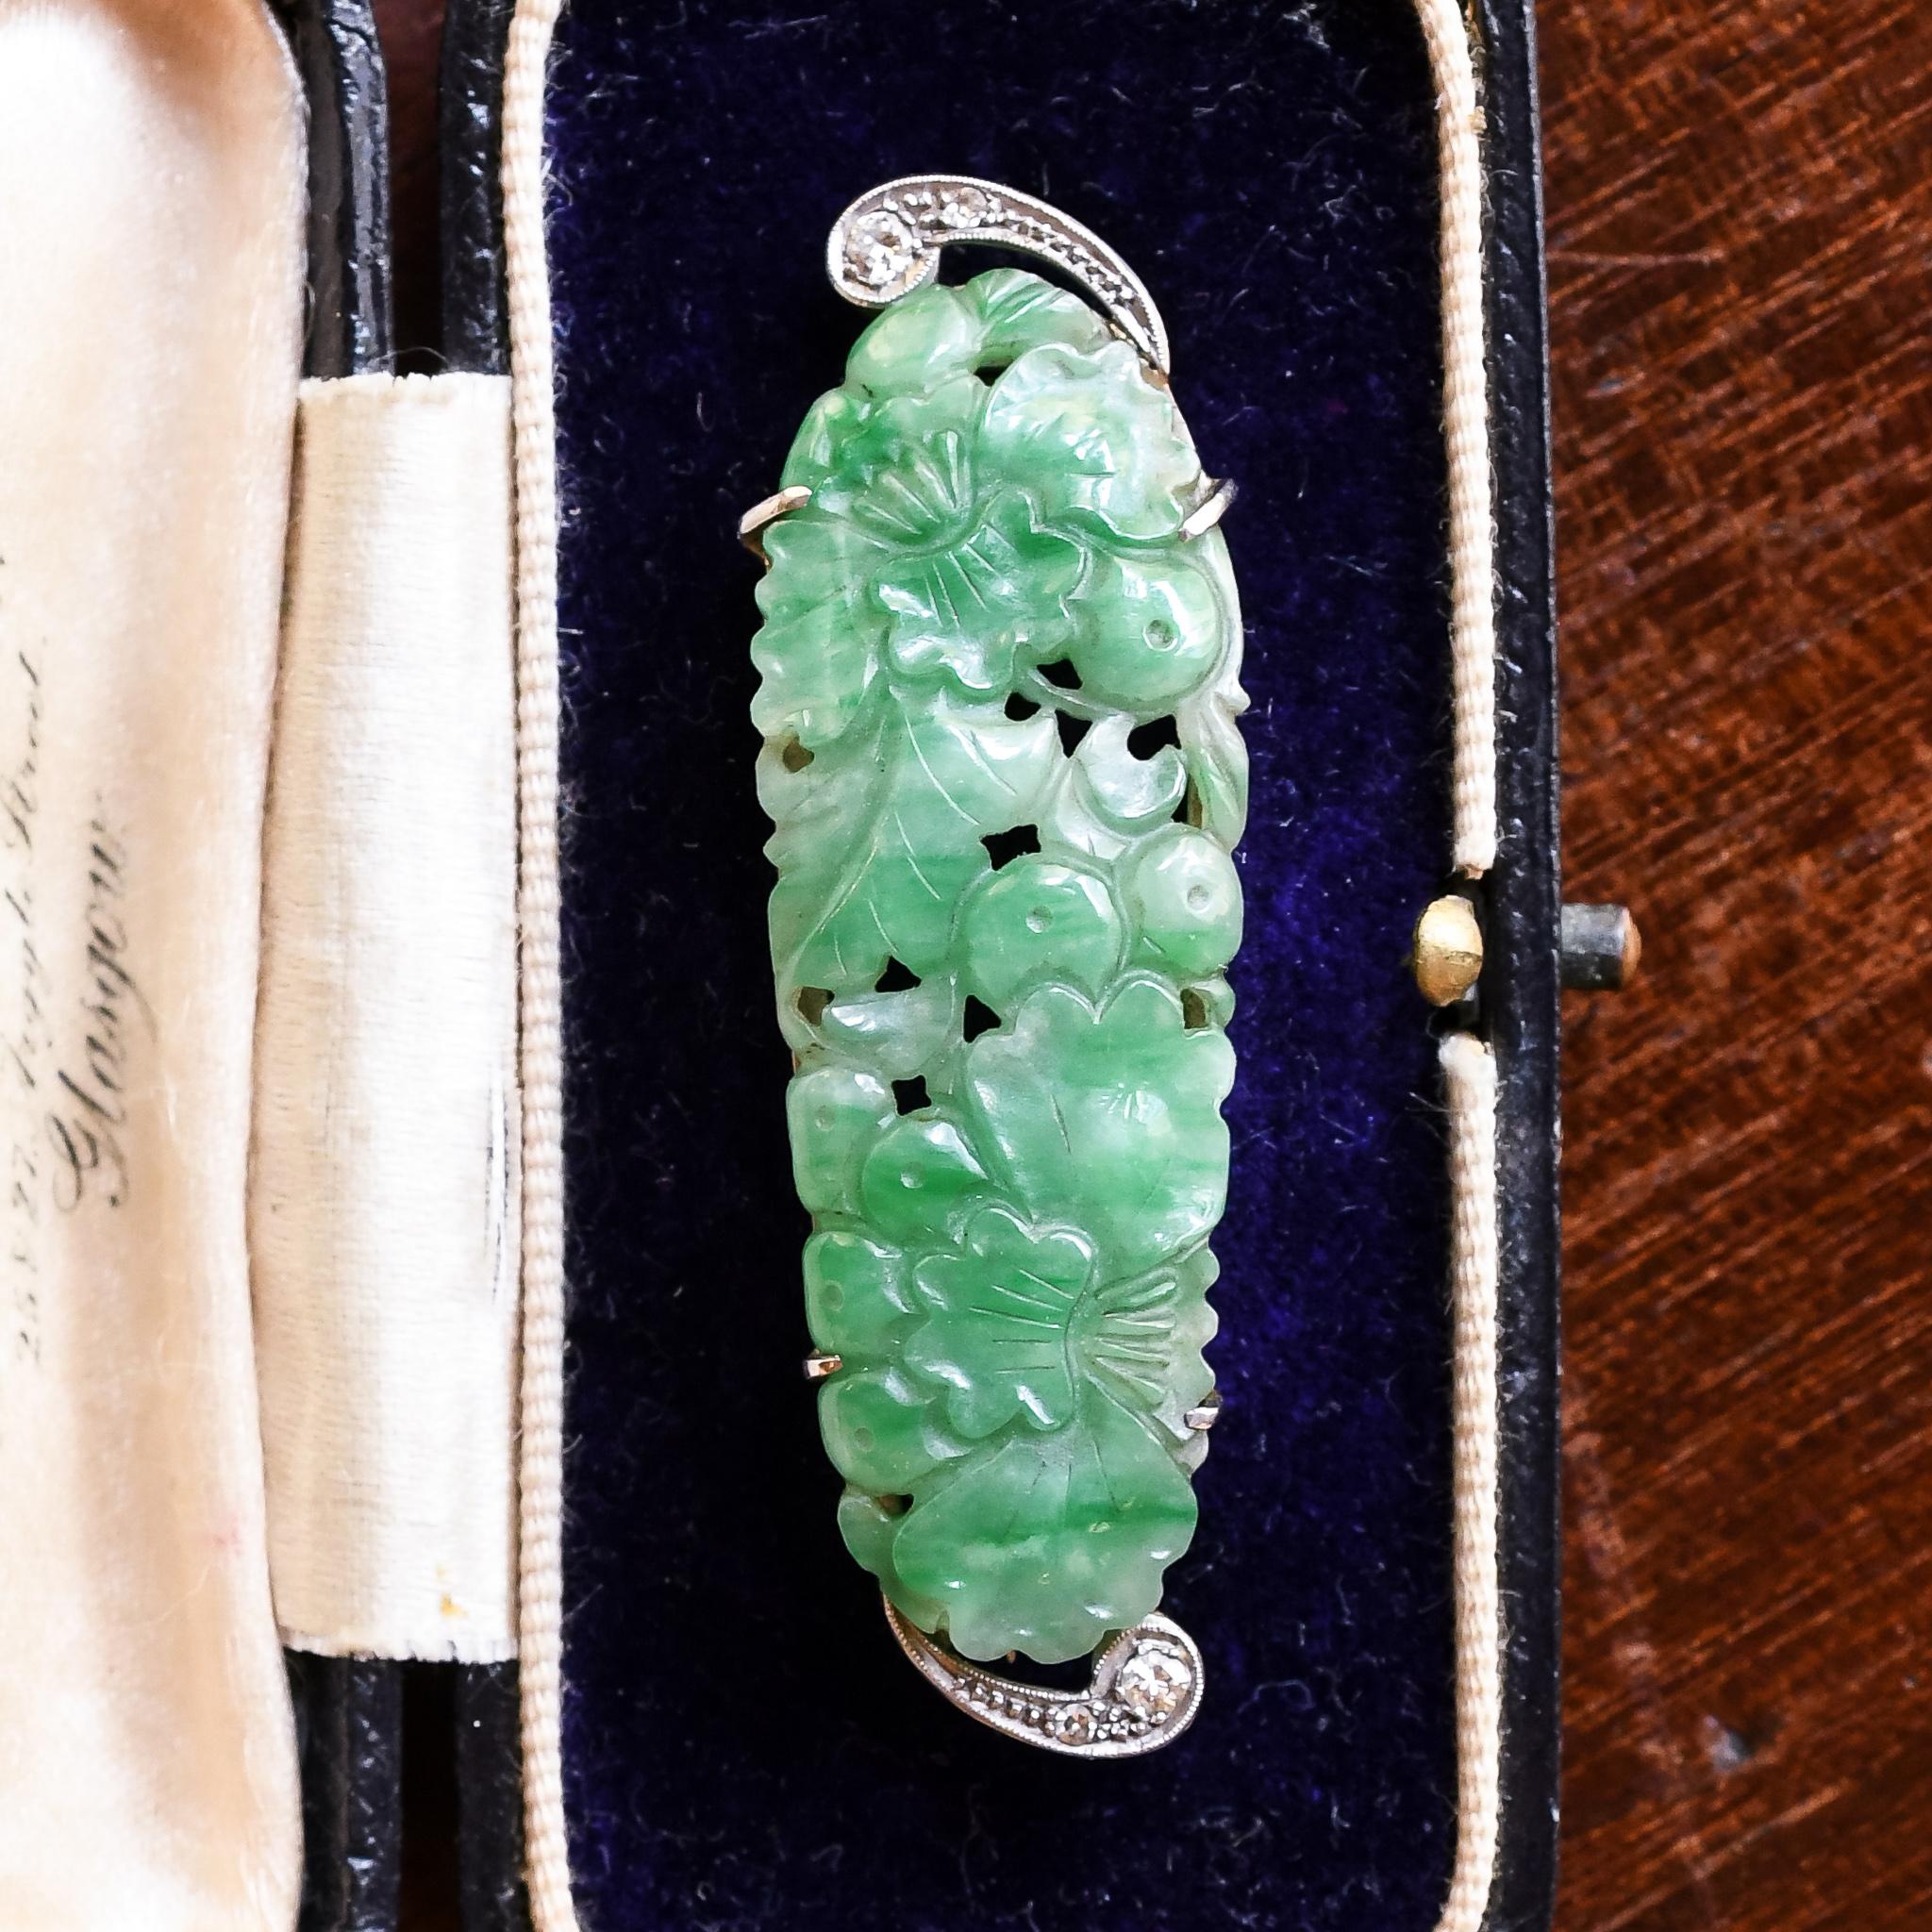 An exceptional carved jade brooch dating from the Art Deco period, circa 1920, although the jade itself is older, Chinese origin, likely carved in mid 19th century. The craftsmanship is exceptional, characterised by opium poppies and foliage. It's